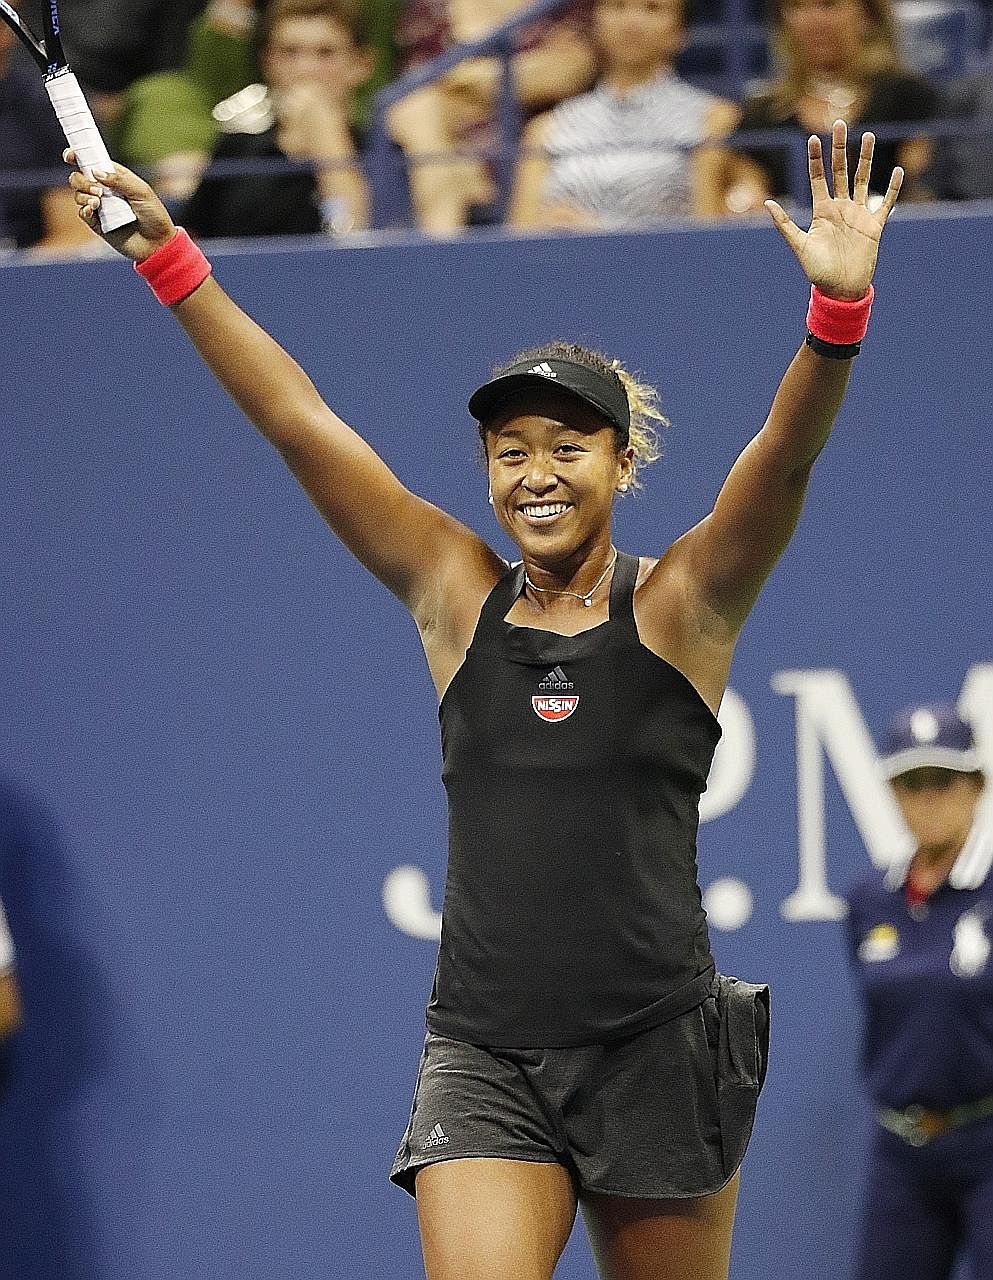 She has been touted as the poster girl for tennis' future, but Naomi Osaka, 20, showed she functions very much in the present when she became the first female Japanese player to reach a Grand Slam final on Thursday. She beat American Madison Keys 6-2